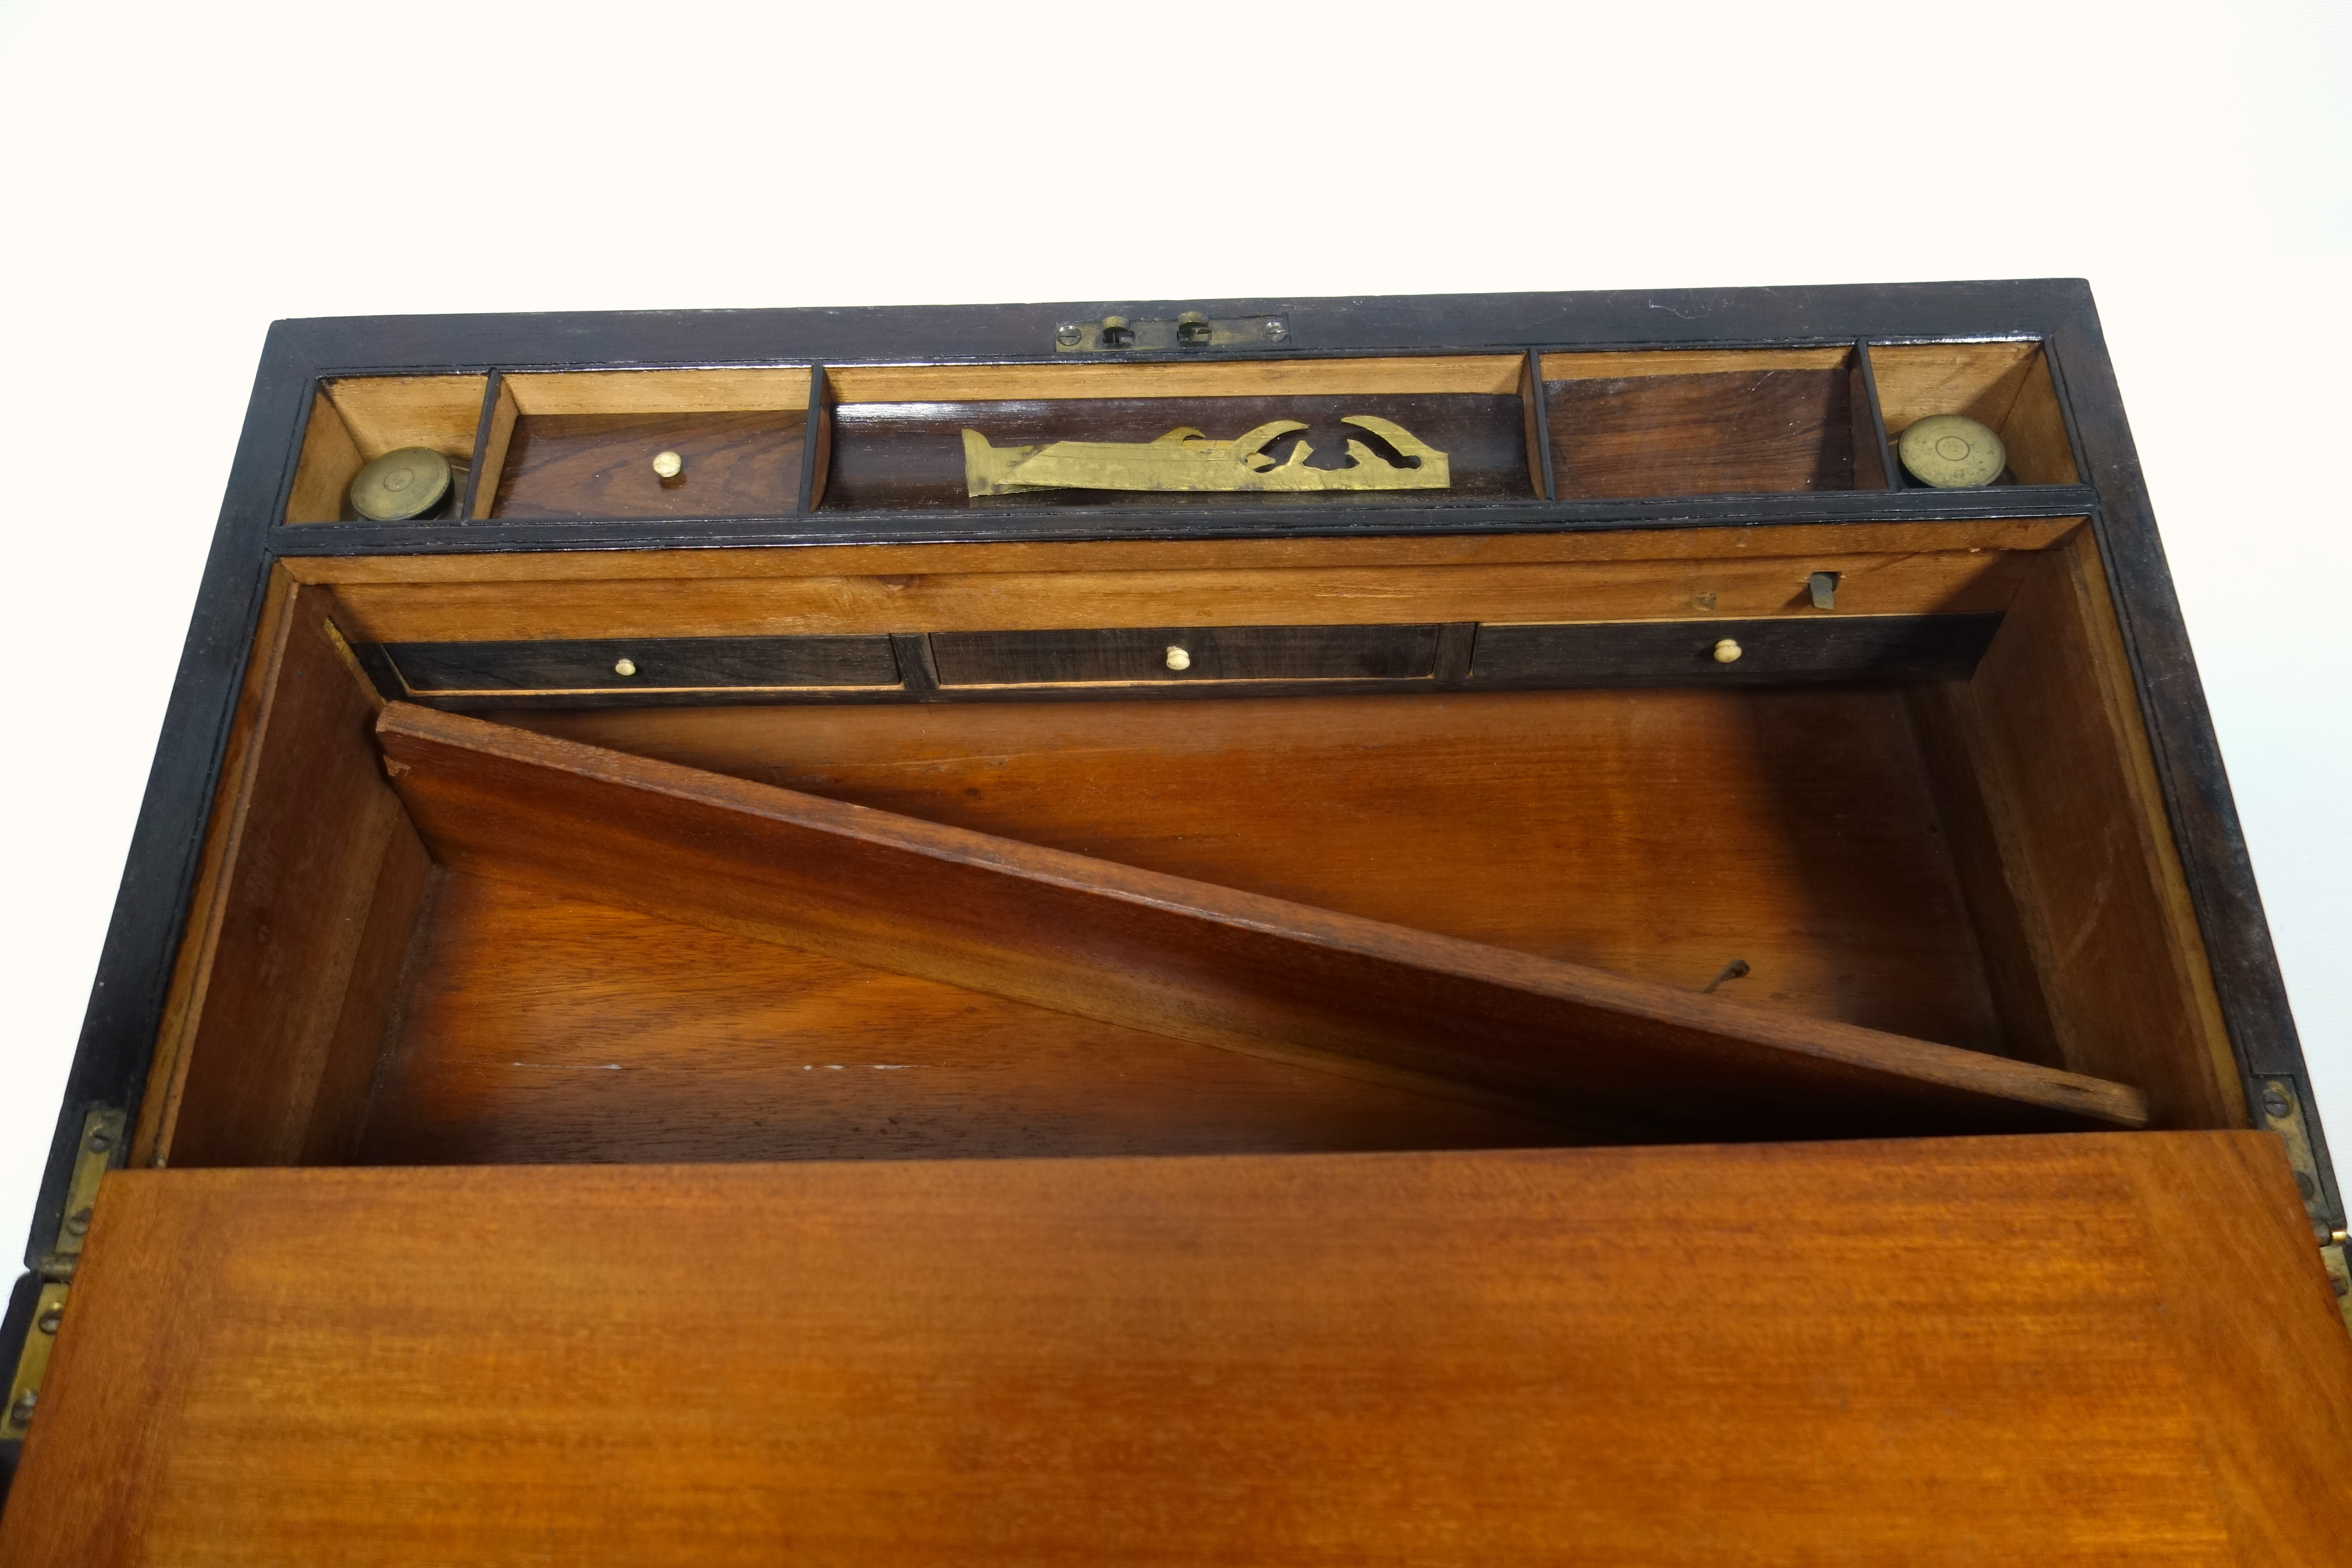 Victorian brass inlaid rosewood portable writing desk with 2 brass covered wells and secret panel - Image 6 of 14